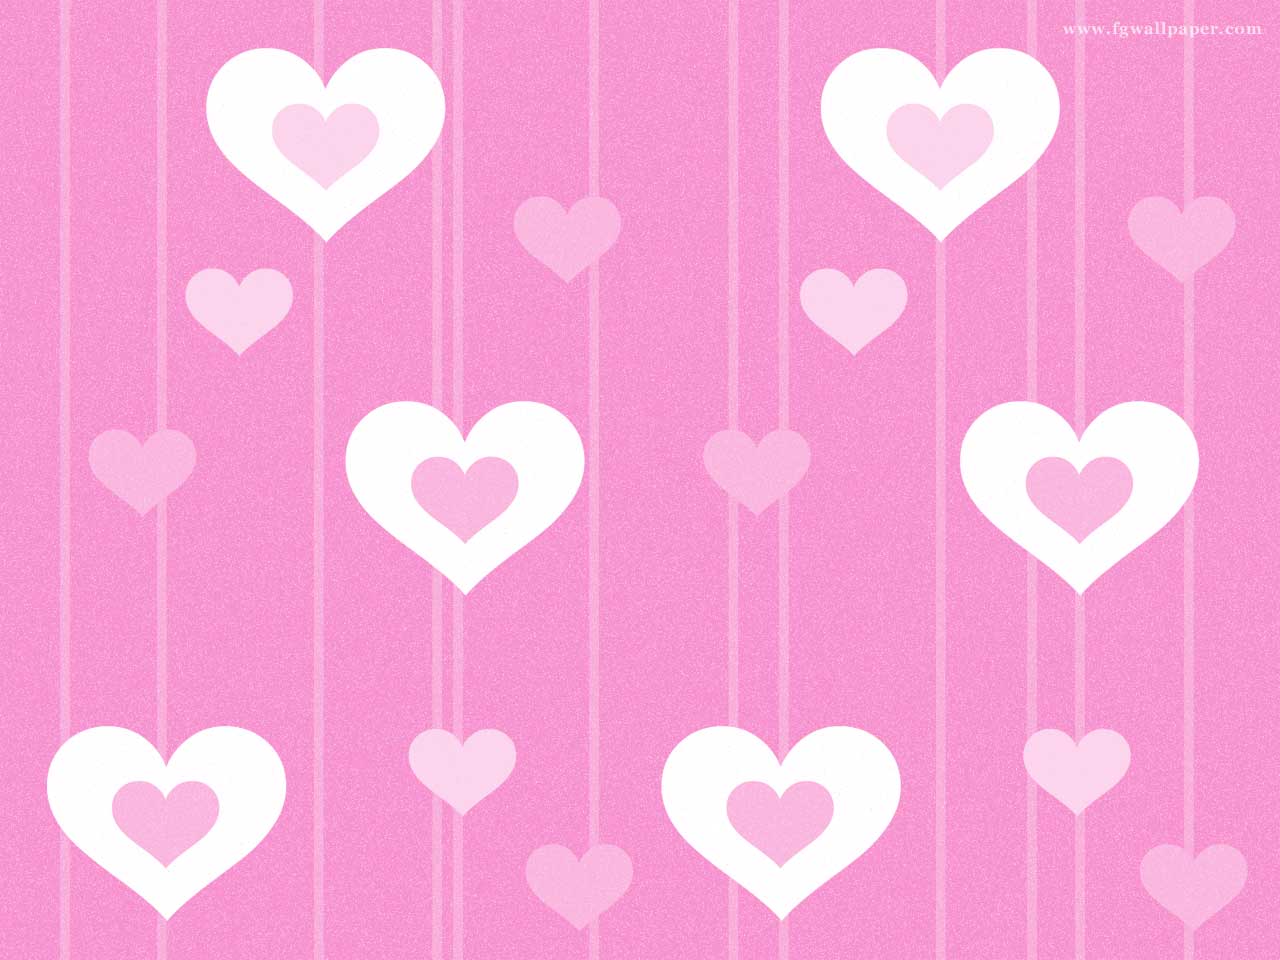 Valentine Pink Heart Synbols Wallpaper and Picture. Imageize: 83